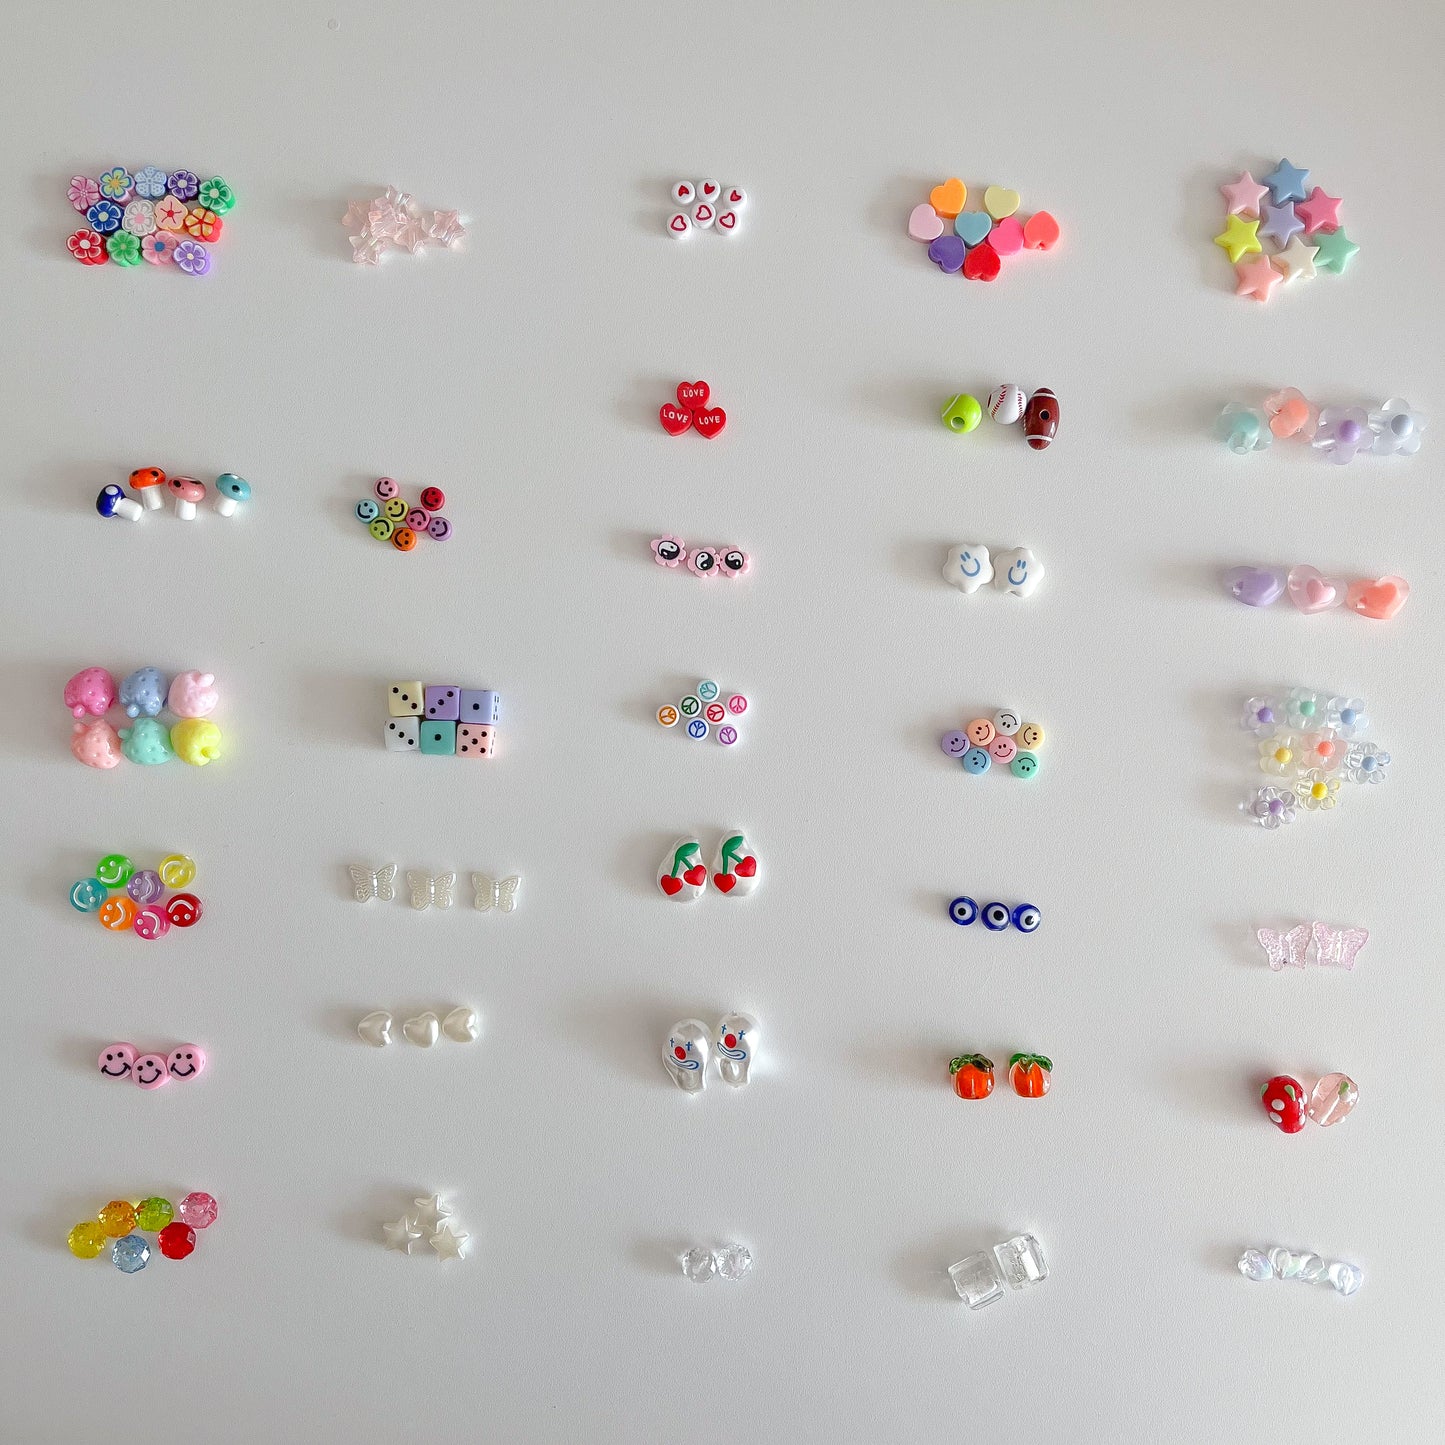 Assorted beads to choose from when creating a custom Drake/Aubrey set.